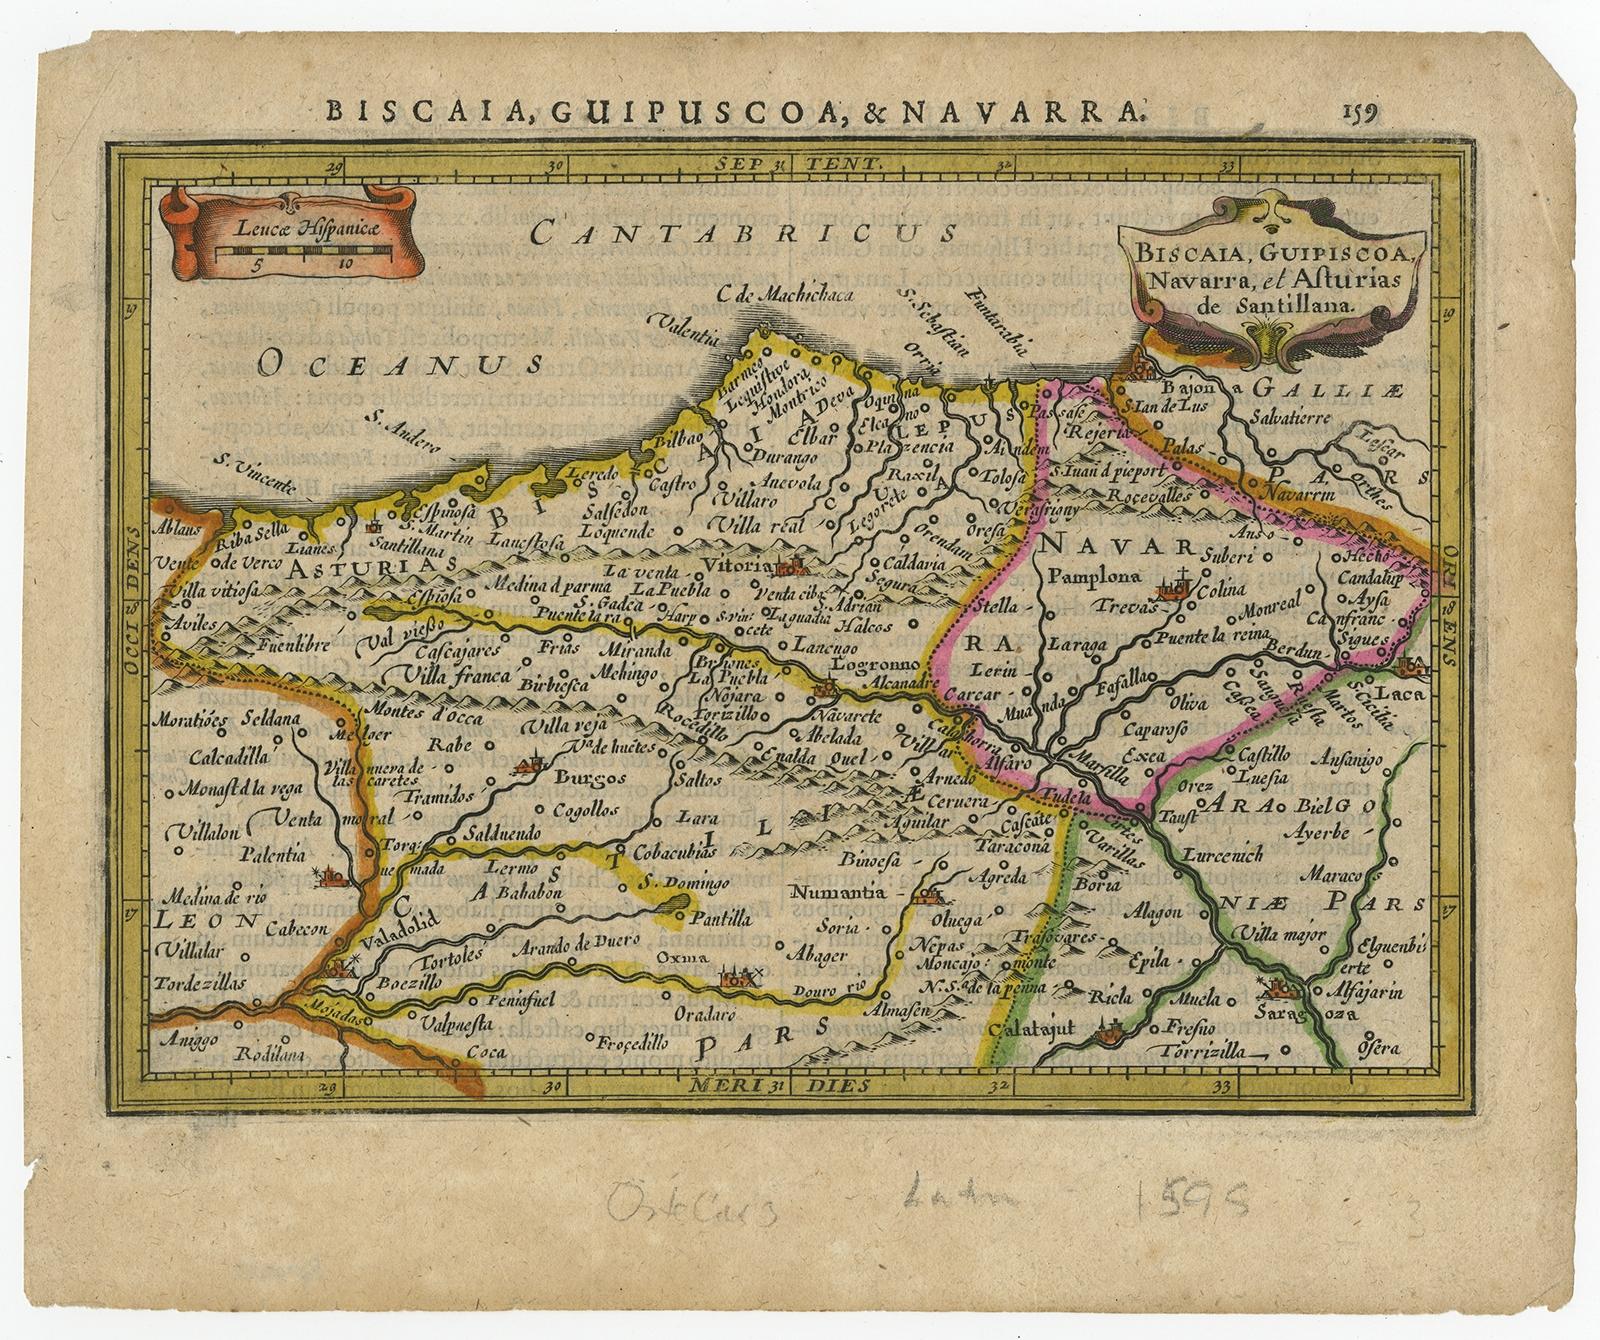 Antique map titled 'Biscaia, Guipiscoa, Navarra et Asturias de Santillana'. 

Charming map of Northeastern Spain with the areas of Pamplona and Valladolid. This map originates from 'Atlas Minor' by G. Mercator.

Artists and engravers: Published